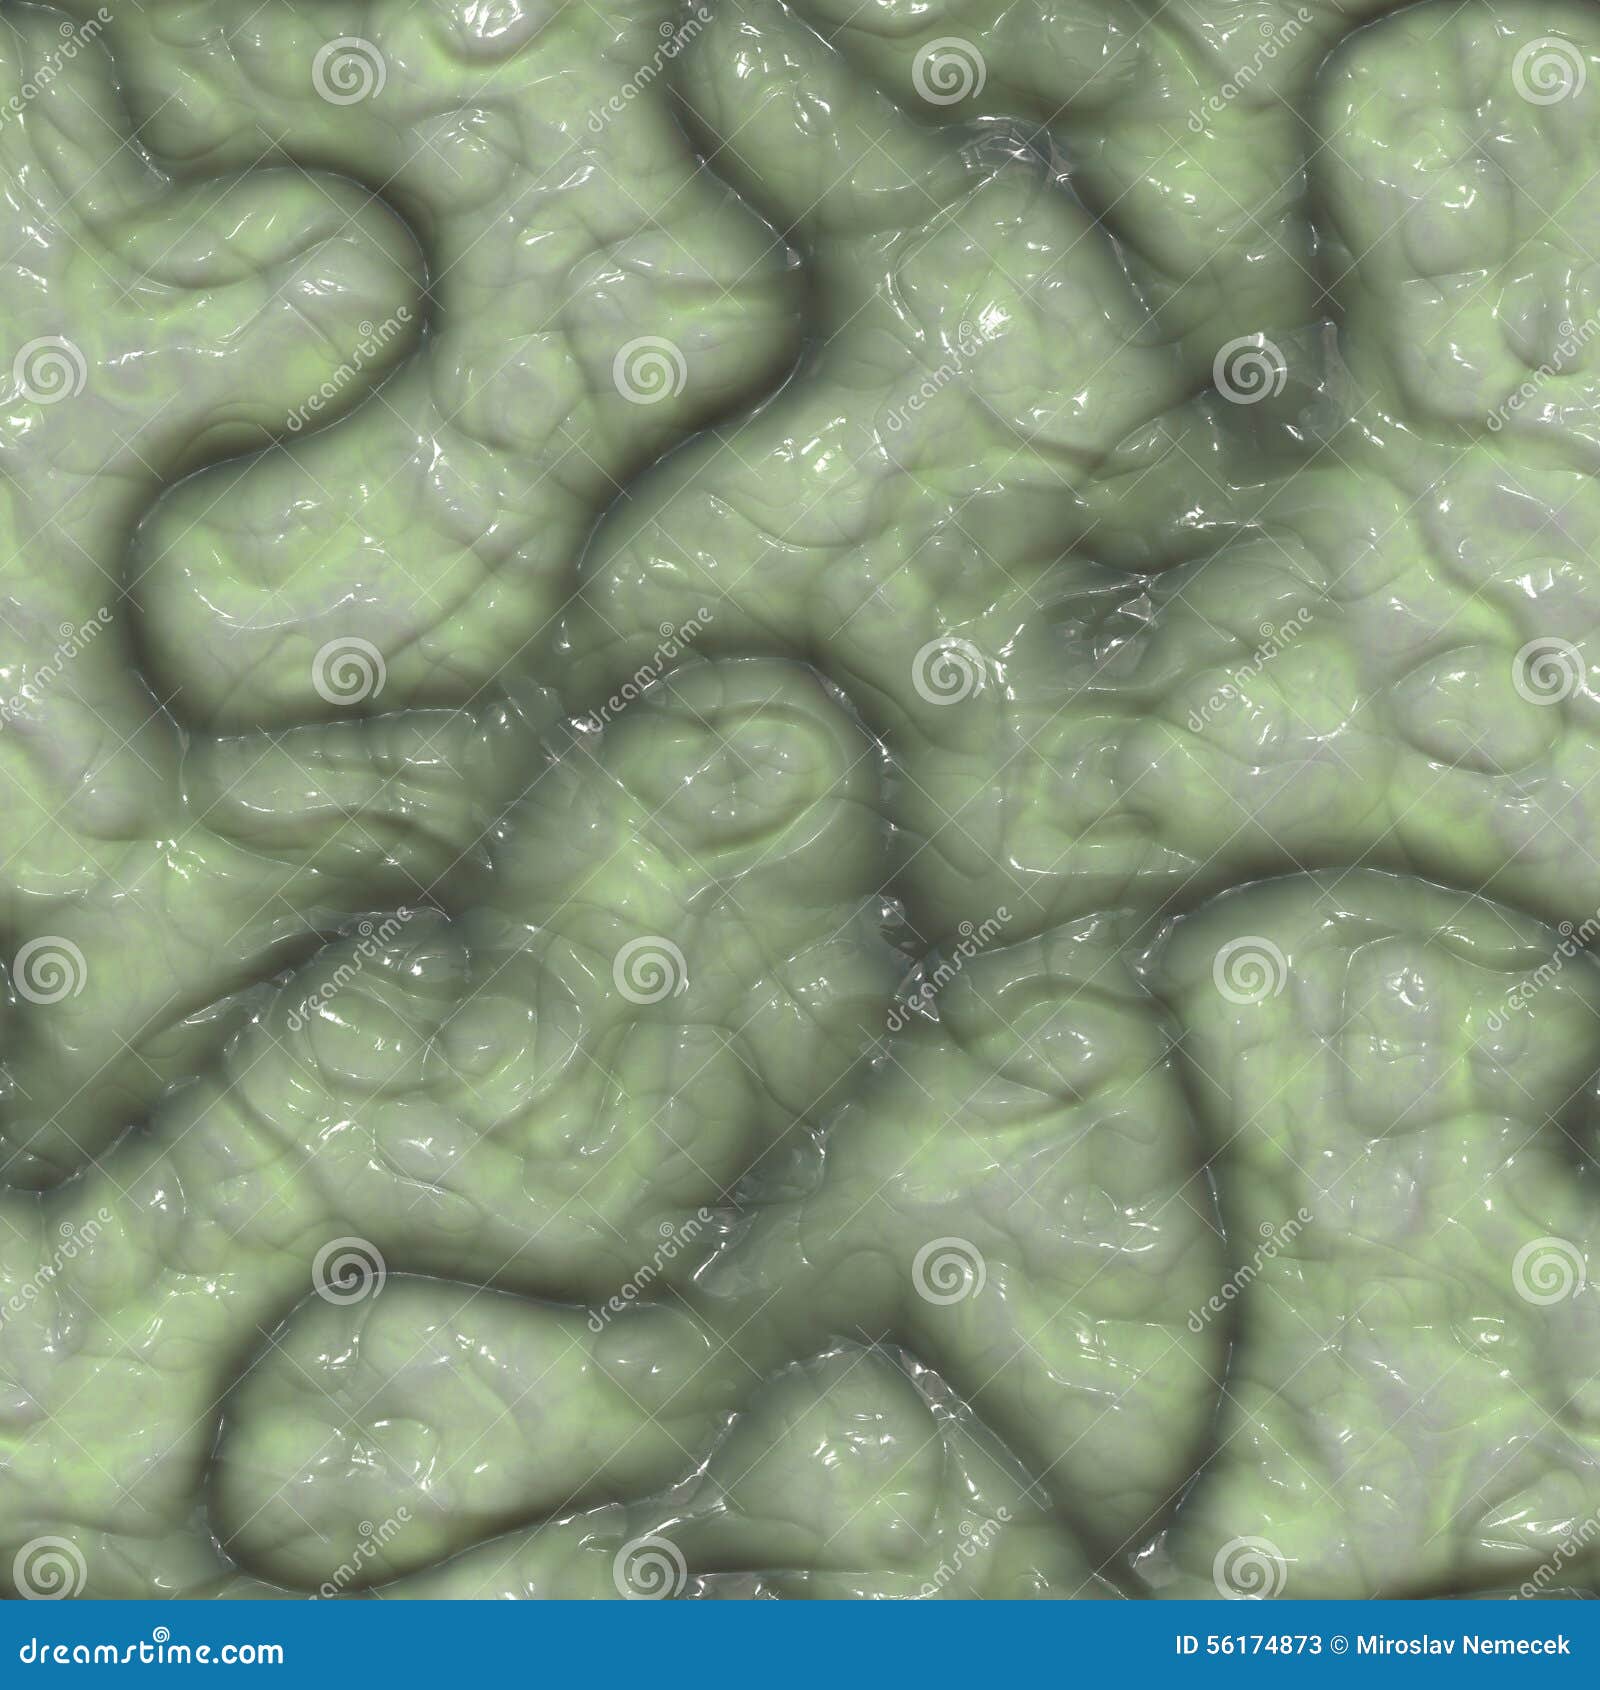 https://thumbs.dreamstime.com/z/organics-meat-seamless-generated-texture-background-56174873.jpg